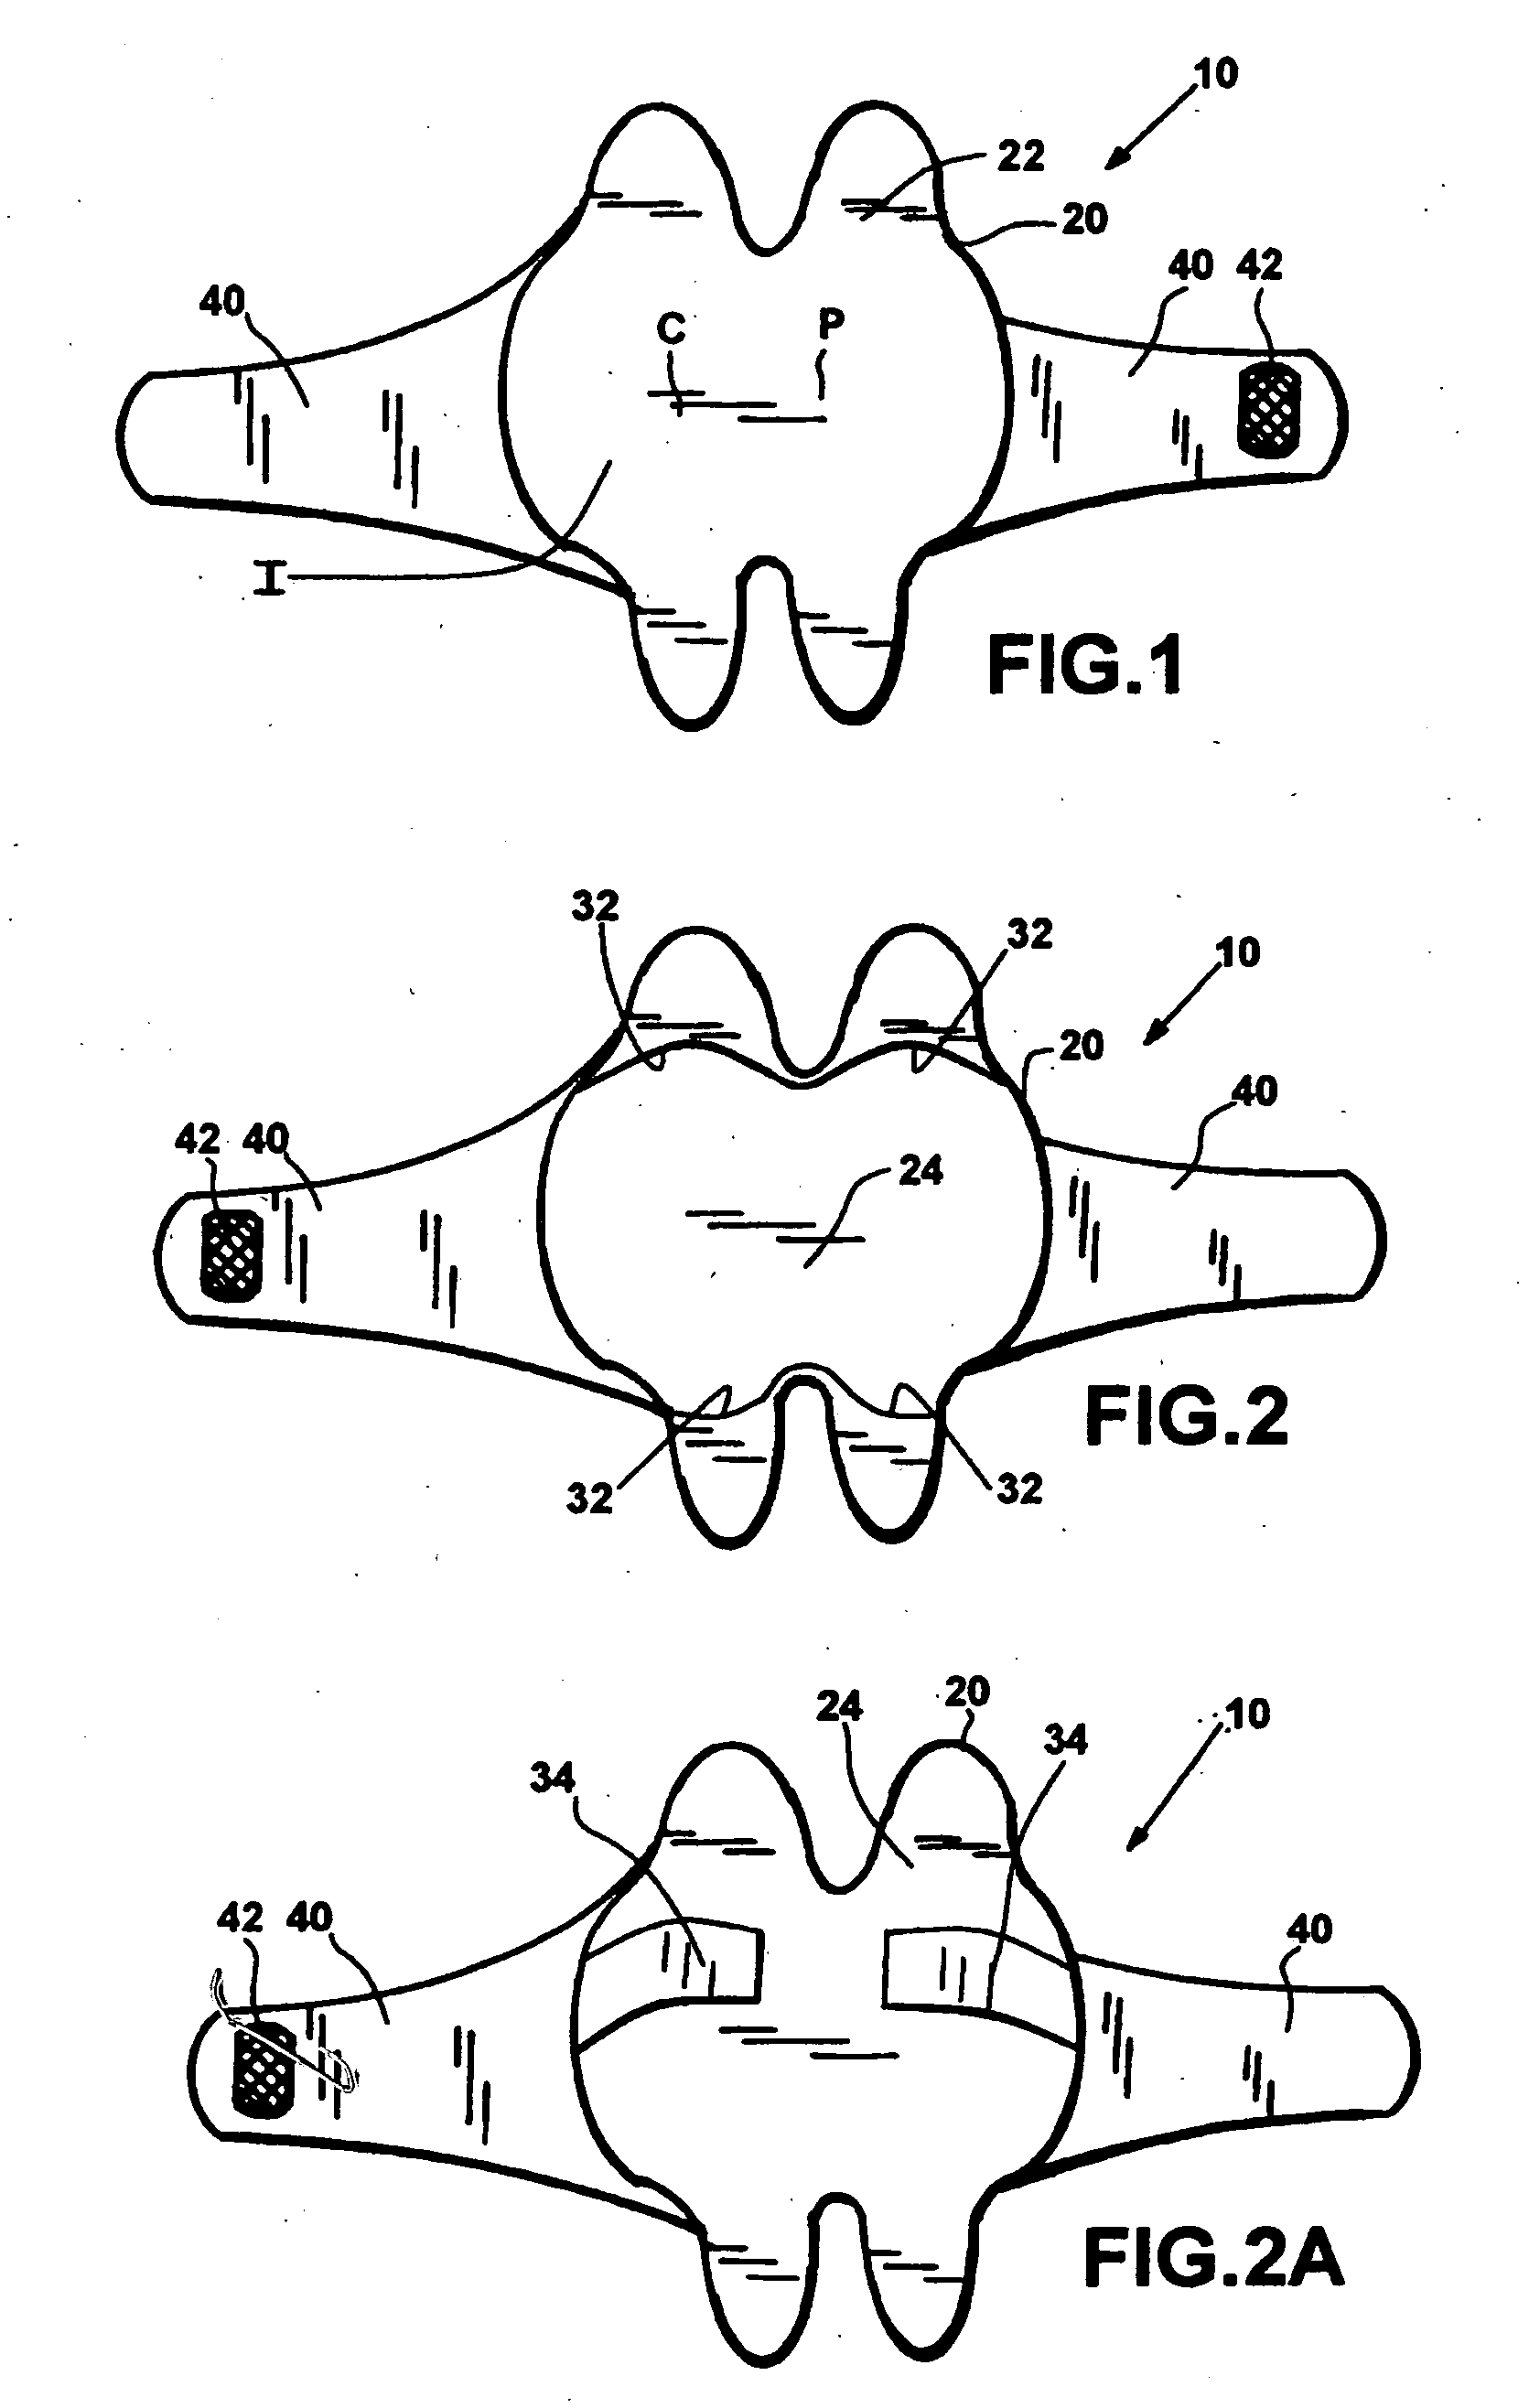 Press-on multicolor application system and method